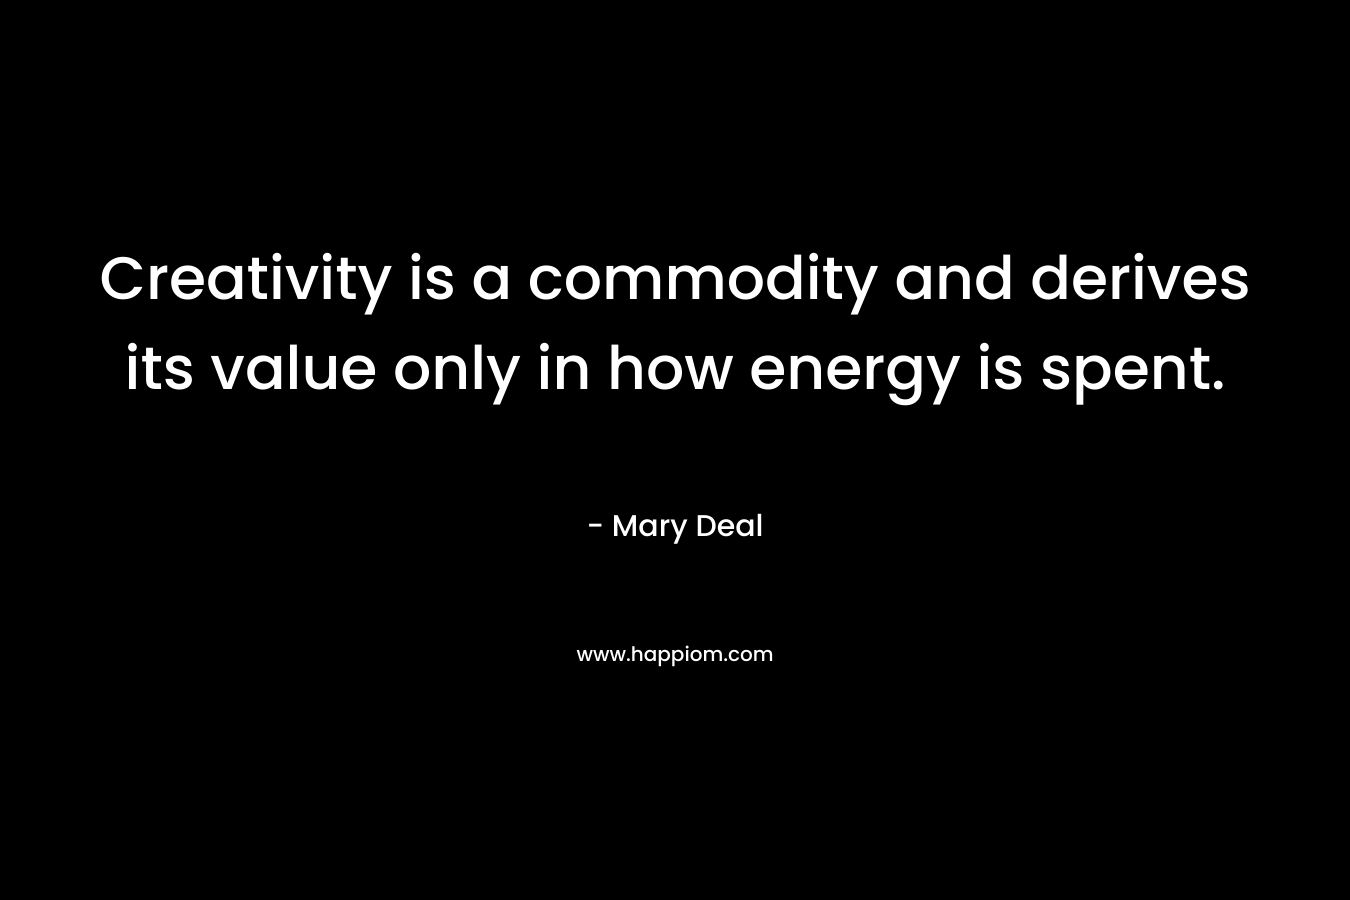 Creativity is a commodity and derives its value only in how energy is spent. – Mary Deal